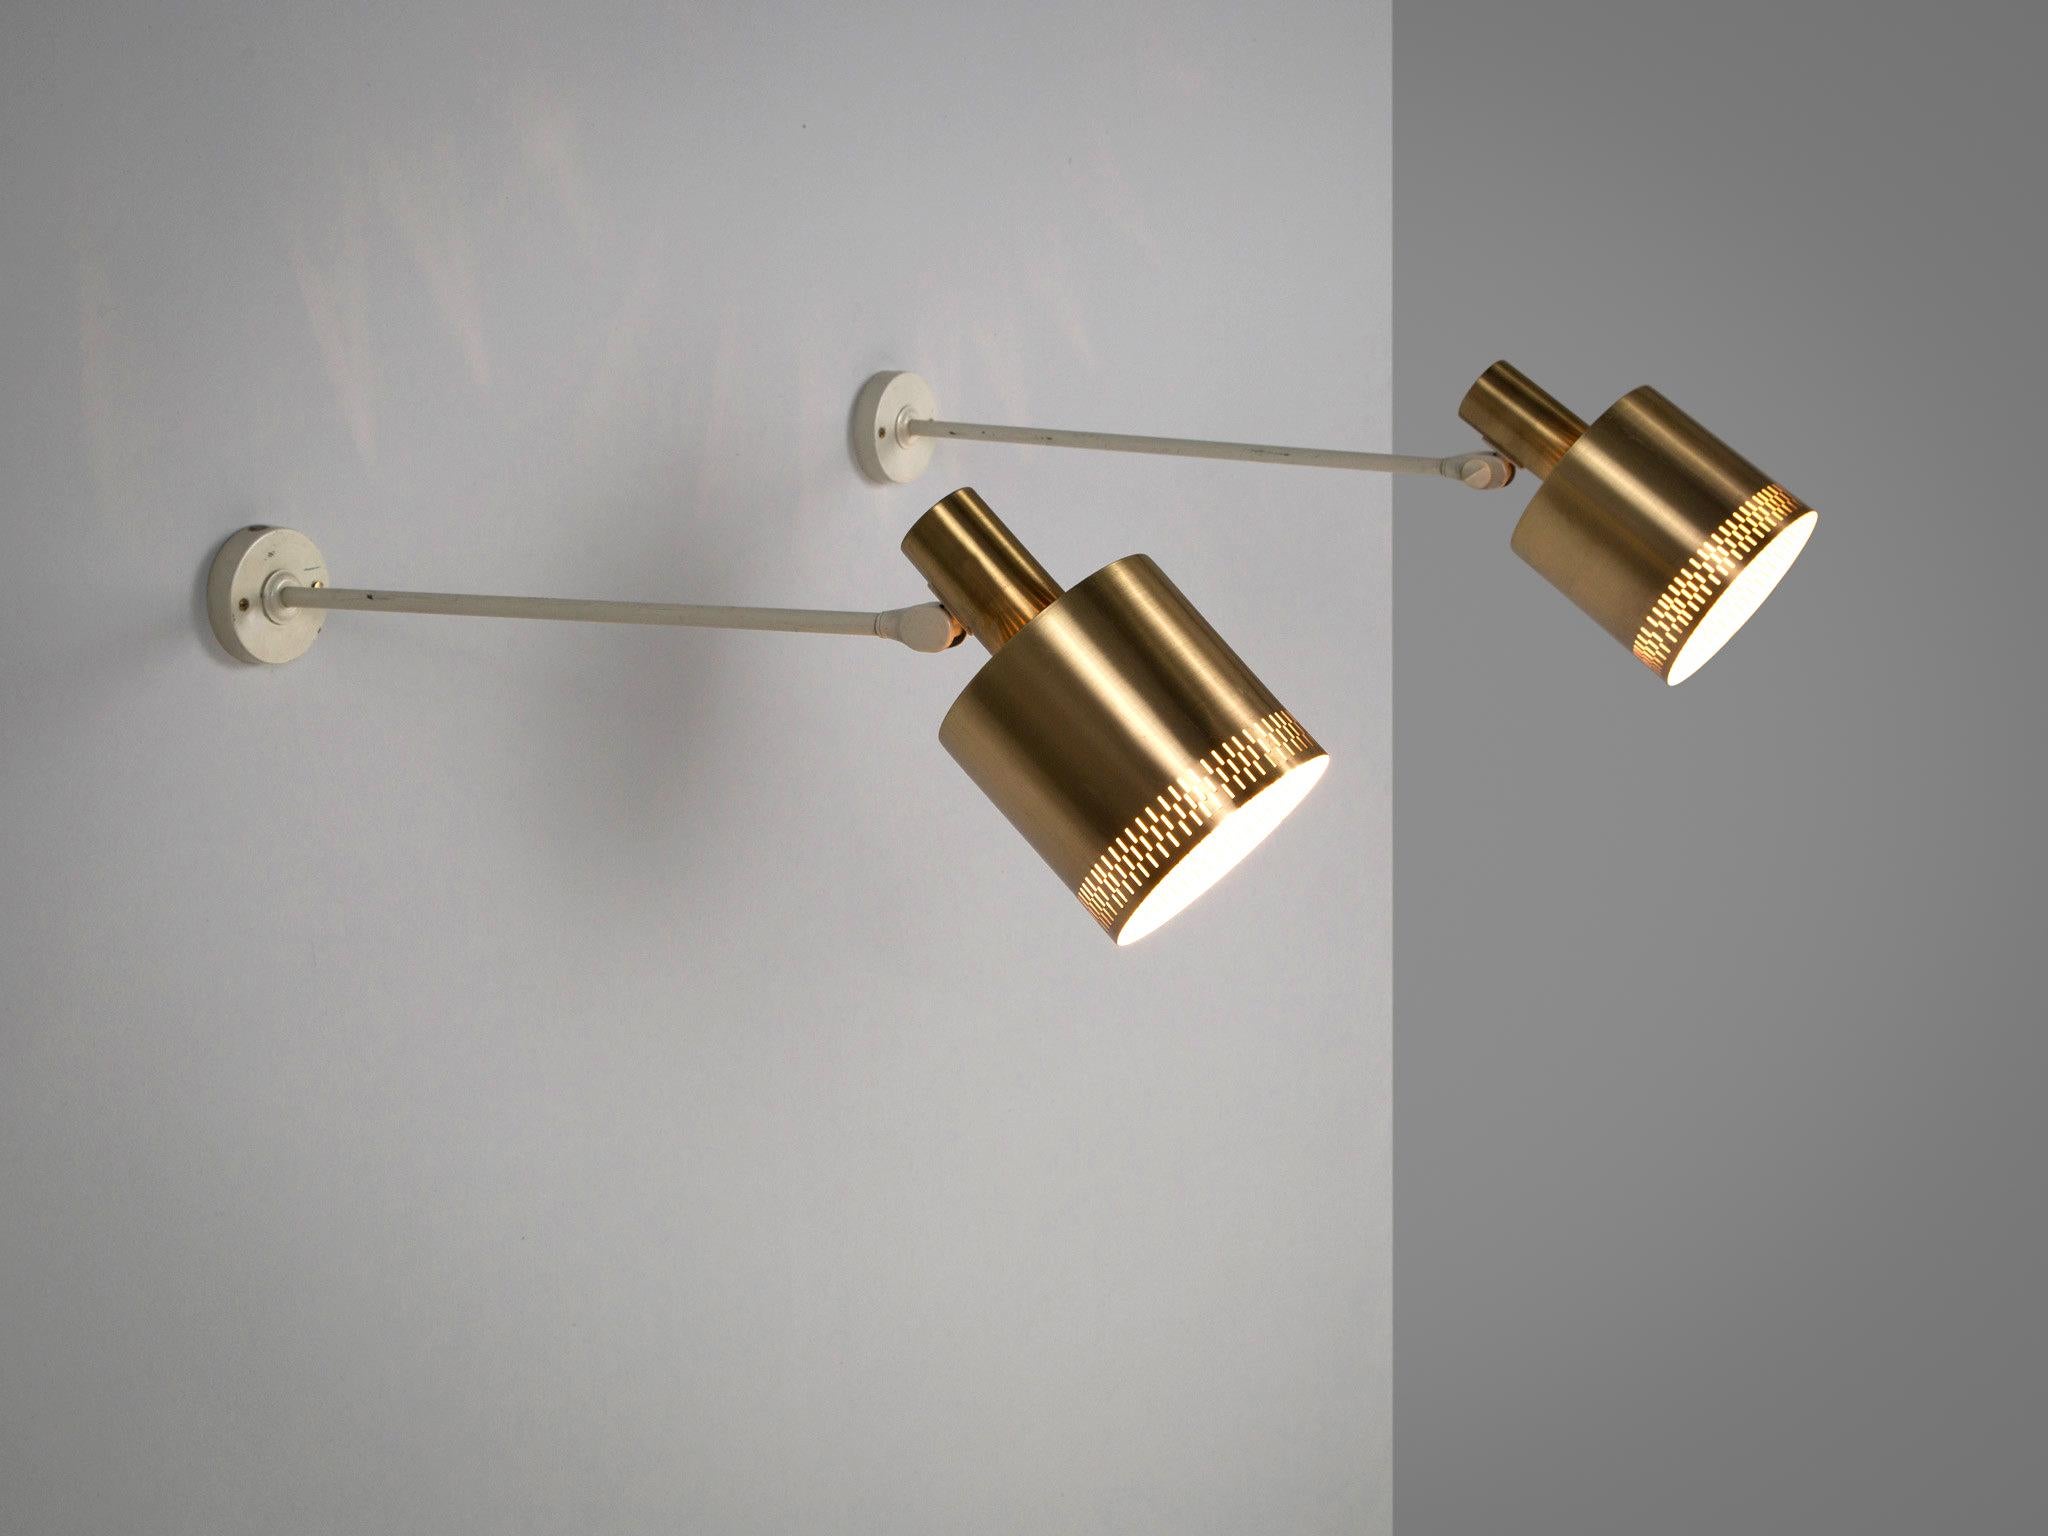 Pair of wall lights, brass and metal, Sweden, 1970s.

Set of two Swedish white metal wall lamps with brass shades. The shades are adjustable so both the wall and the room can be illuminated. The brass shade has perforated details which provide a